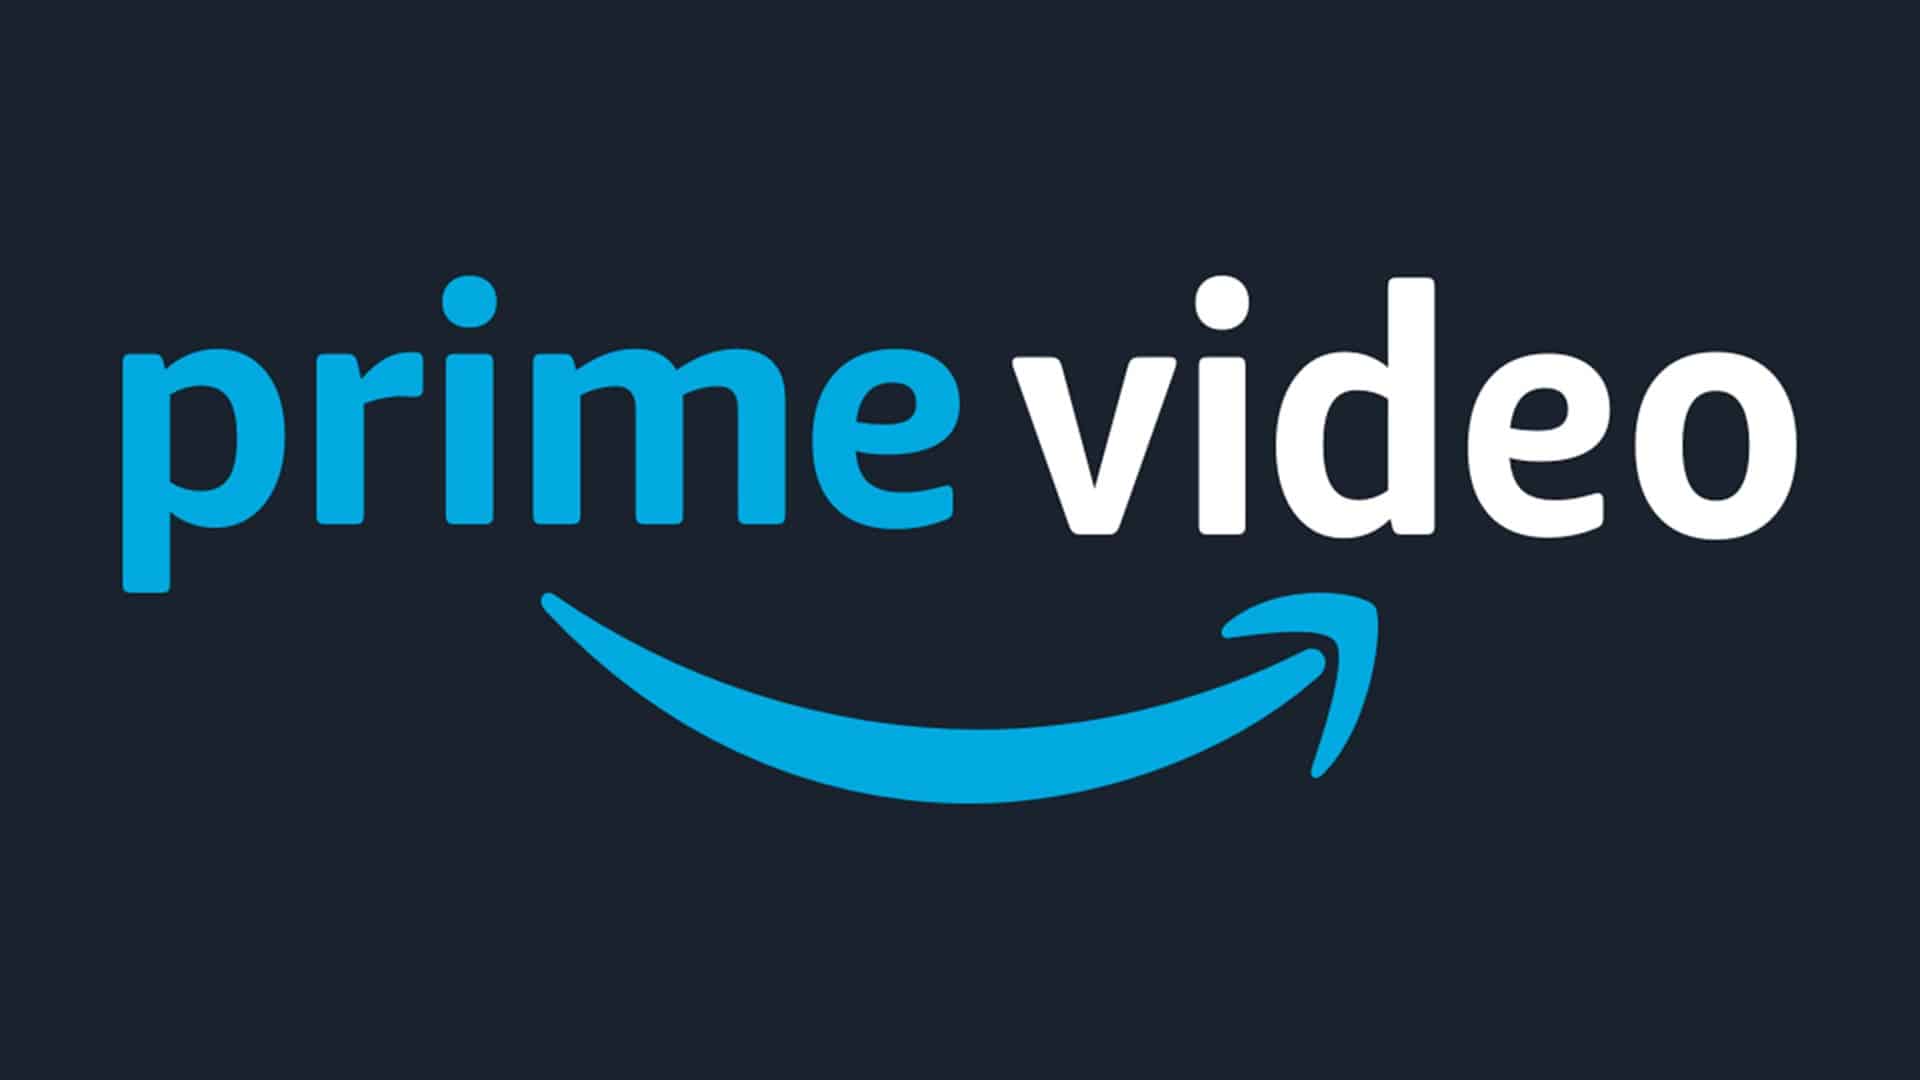 Amazon rolls out Prime Video app for Mac. Check details